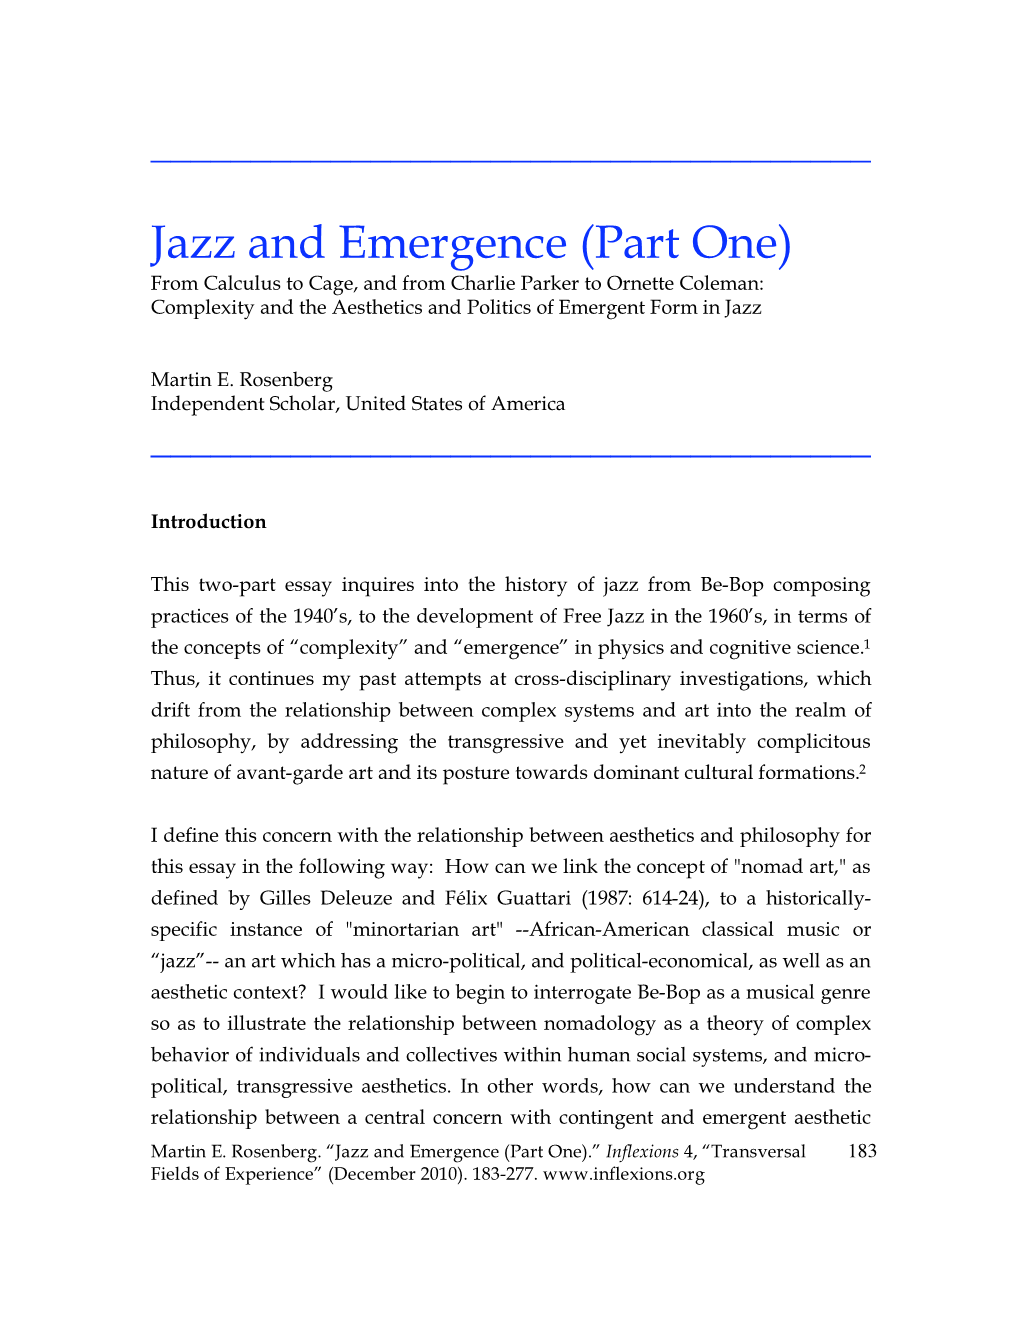 Jazz and Emergence (Part One) from Calculus to Cage, and from Charlie Parker to Ornette Coleman: Complexity and the Aesthetics and Politics of Emergent Form in Jazz